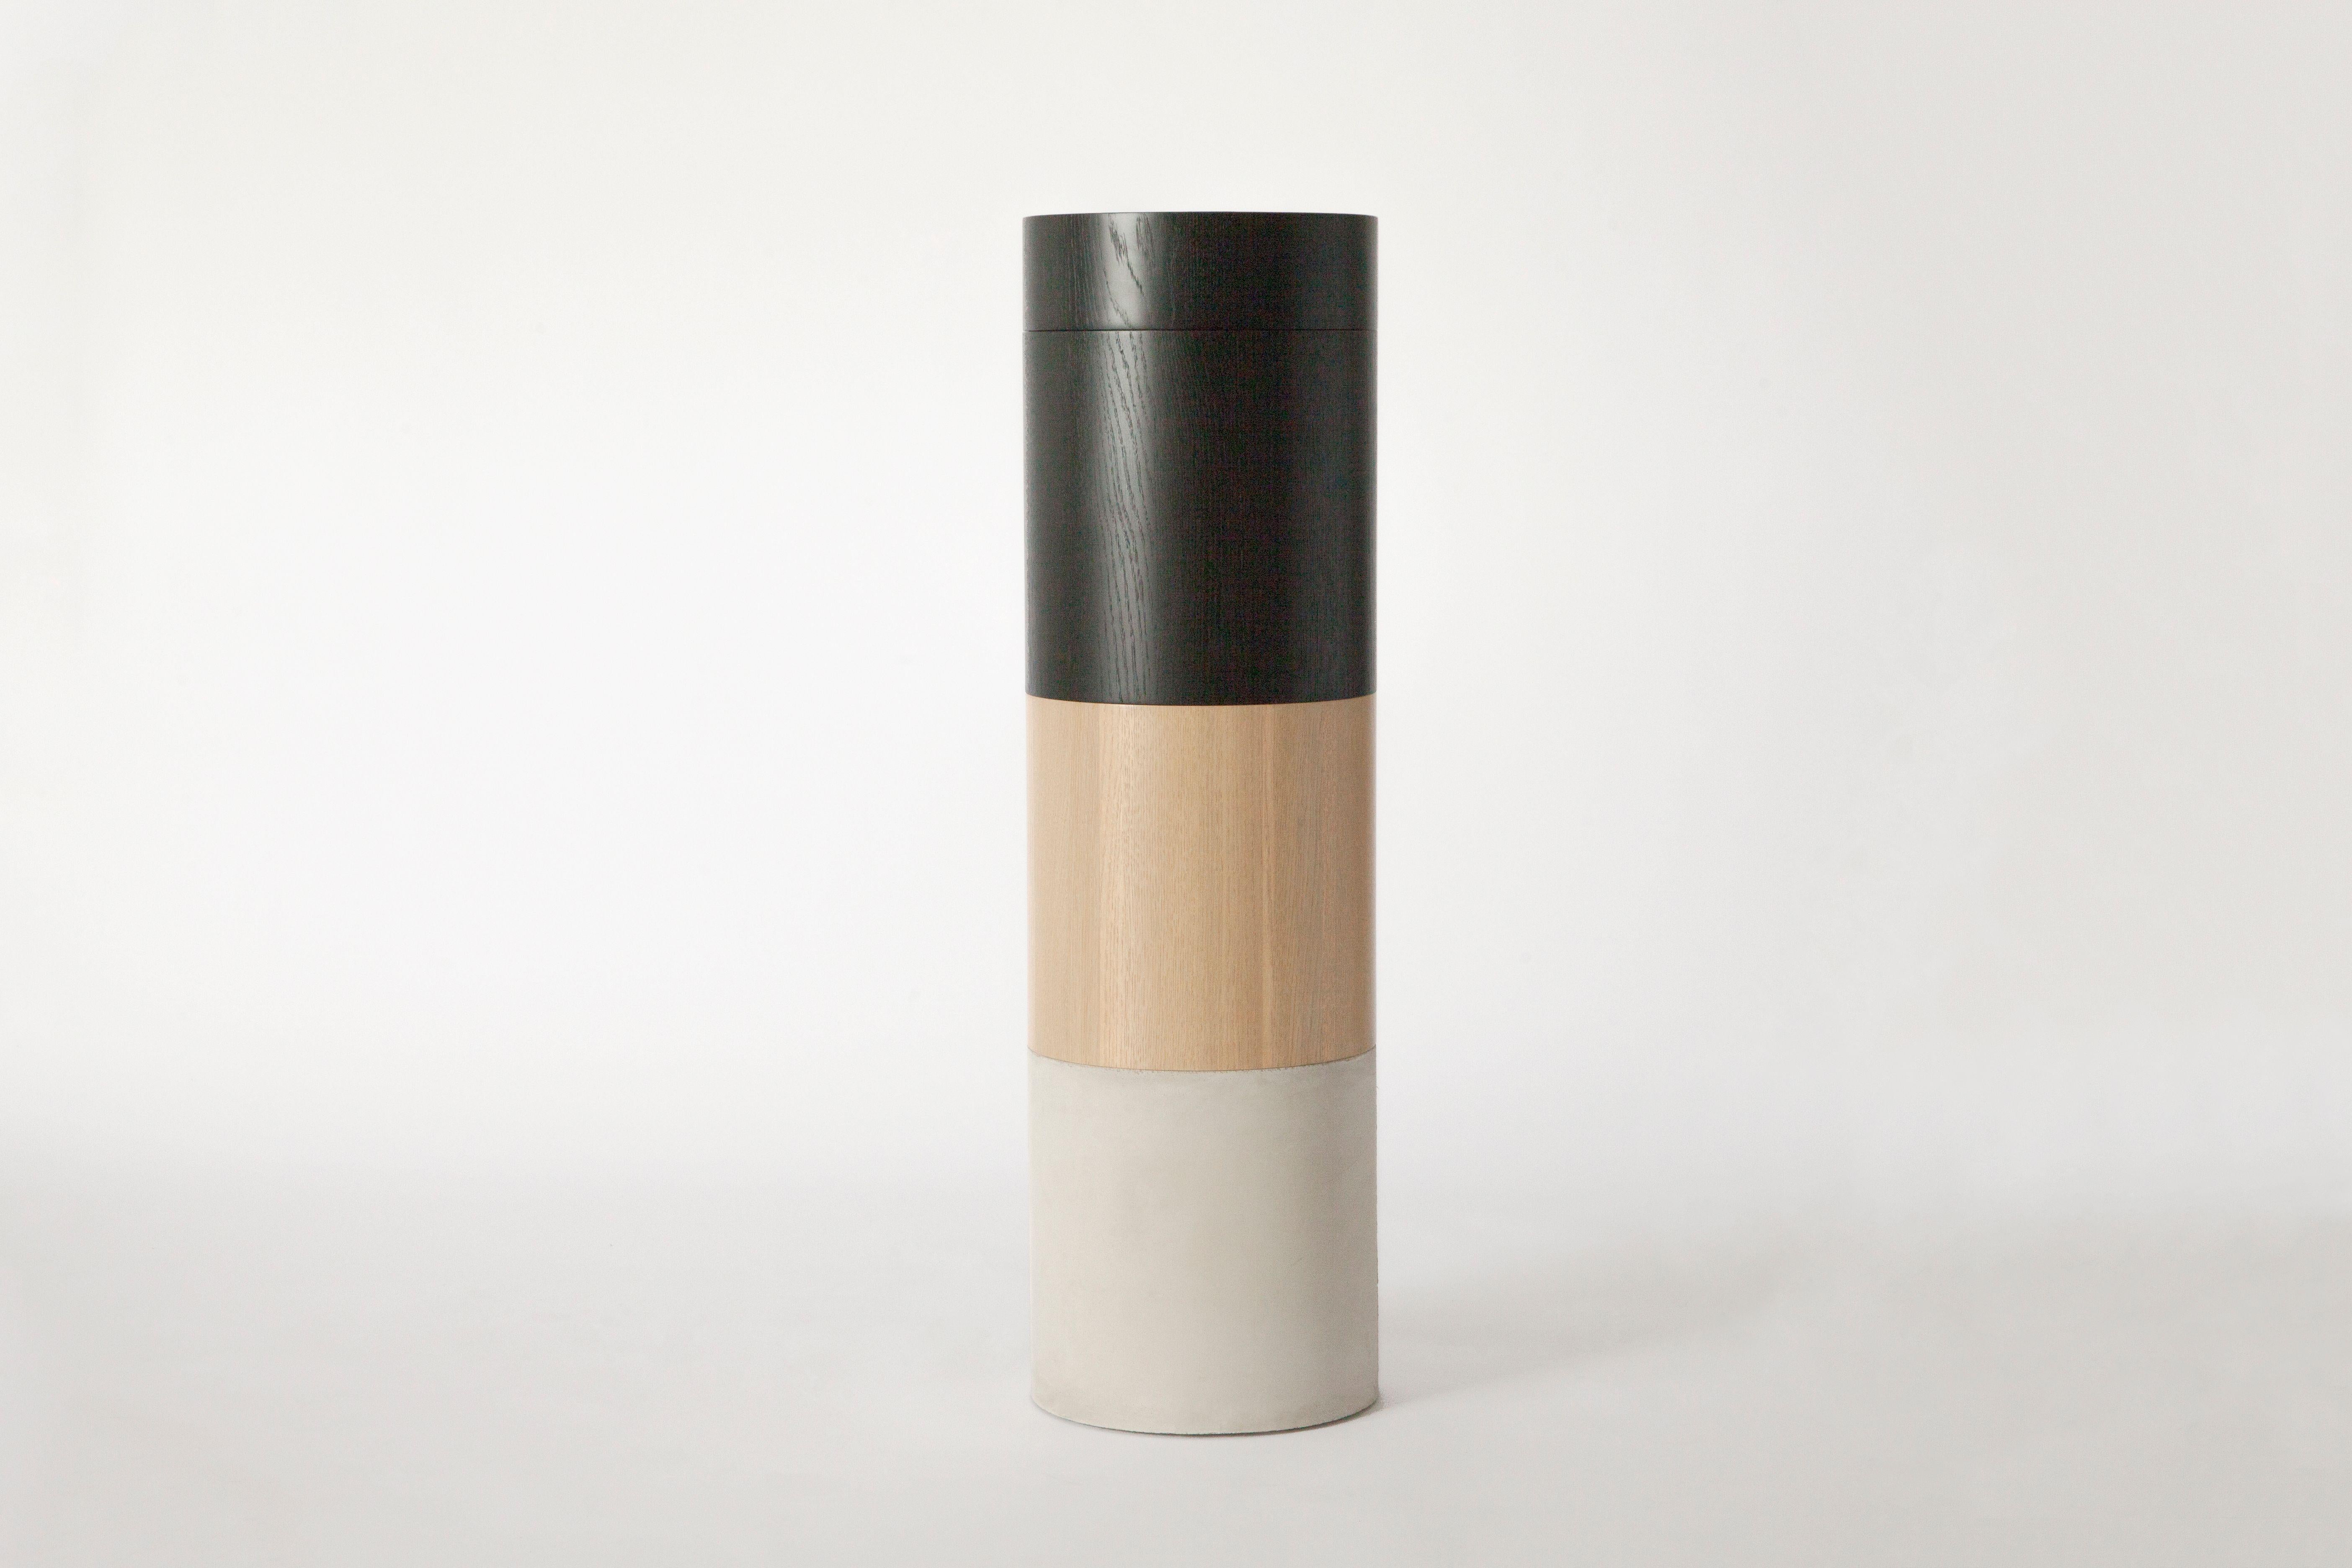 TOTEM by Estudio Persona
Dimensions: D 33 x H 109.5 cm
Materials: Solid ash, concrete base

Sculptural console composed of two stackable stools and a side table.
Made in solid ash (stained black and natural) with a concrete base, finished with